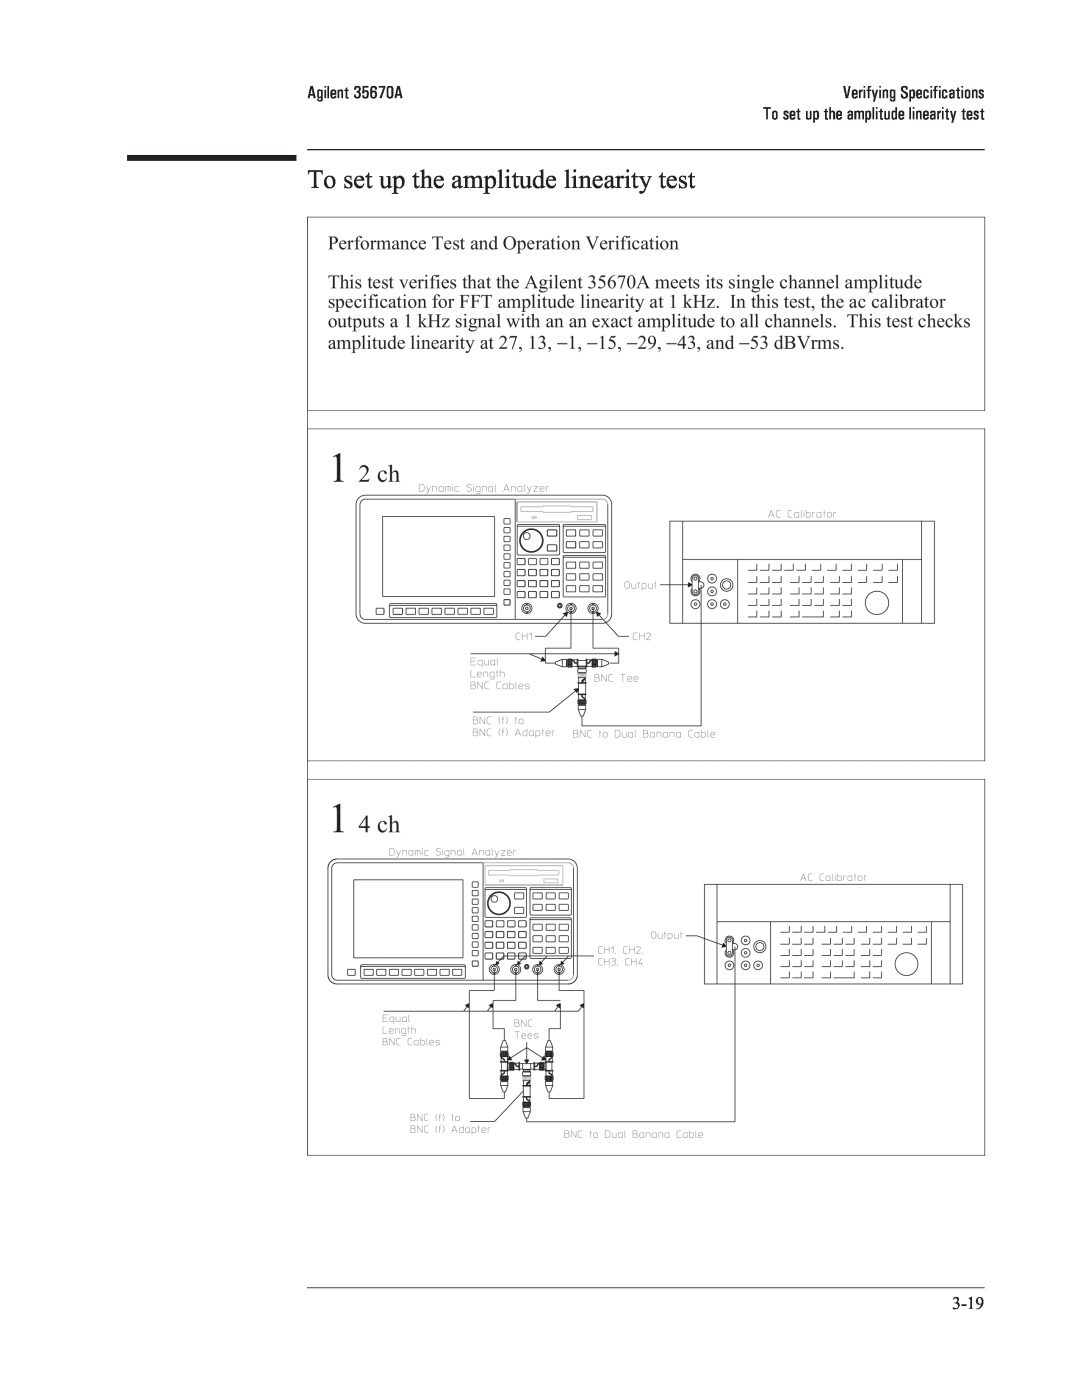 Agilent Technologies 35670-90066 manual To set up the amplitude linearity test, 1 2 ch, 1 4 ch 